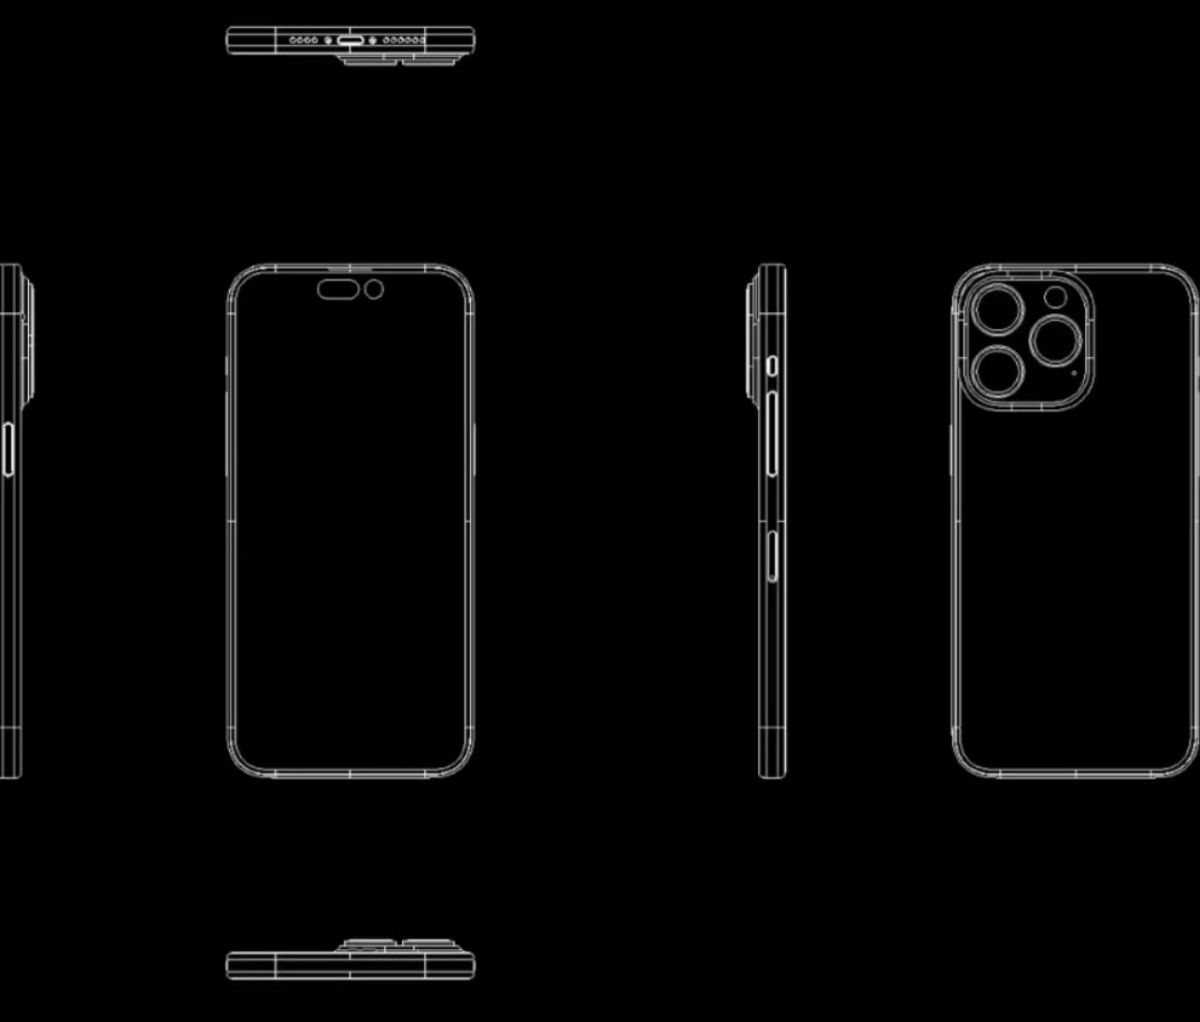 Recent leaks suggest that Apple is incorporating some innovative changes, including a revamped volume and mute switch design.